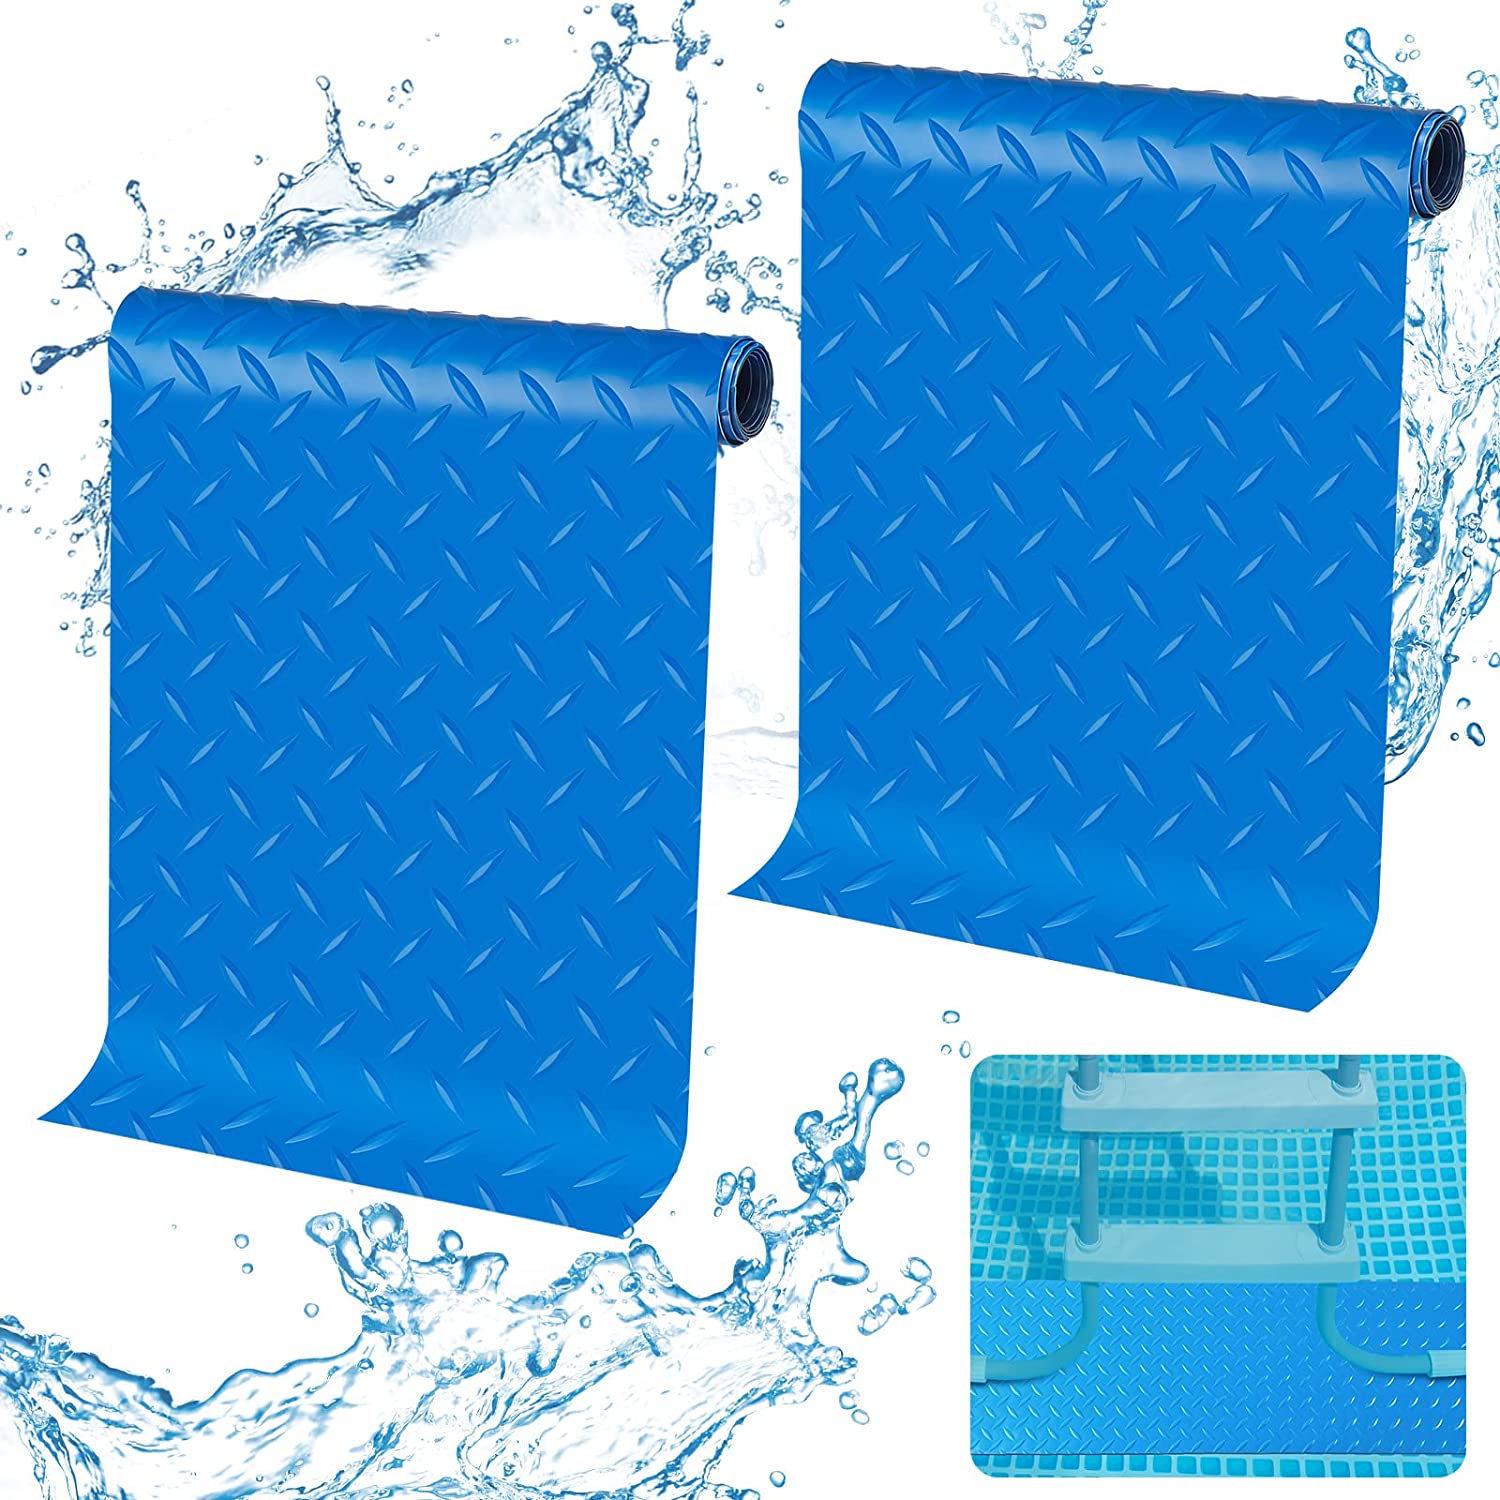 Blue Medium (36 X 36 inch) Swimming Pool Ladder Mat Protective Pool Ladder Pad Step Mat with Non-Slip Texture